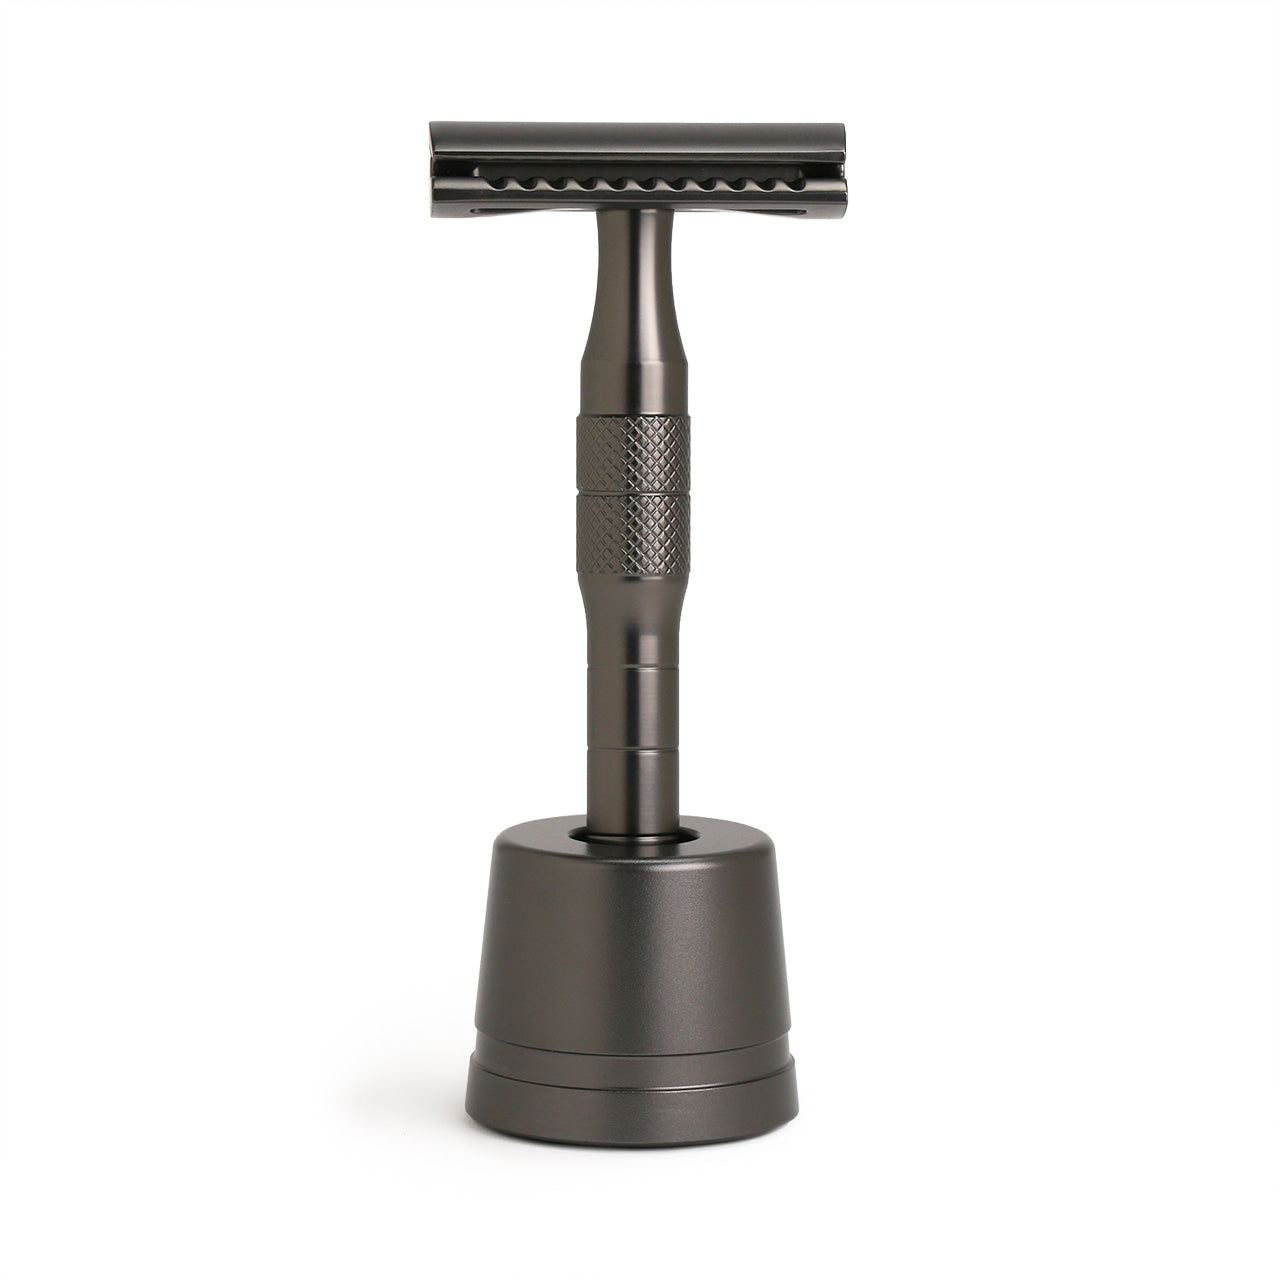 Daily Shaver Safety Razor and stand with chrome finish